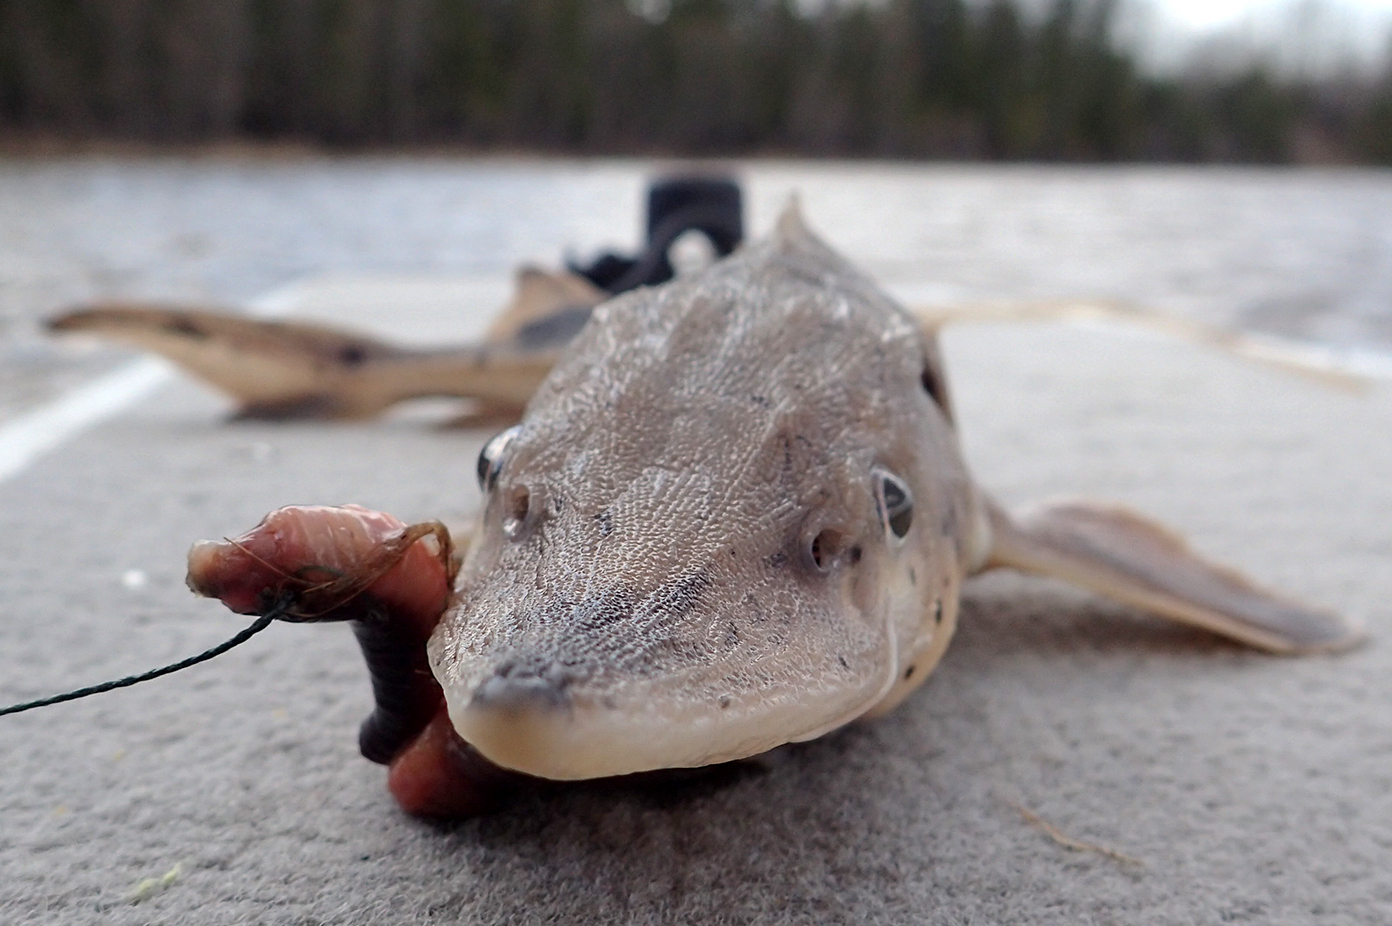 A 14-inch baby sturgeon caught in the Rainy River last week had the look and feel of a lizard.